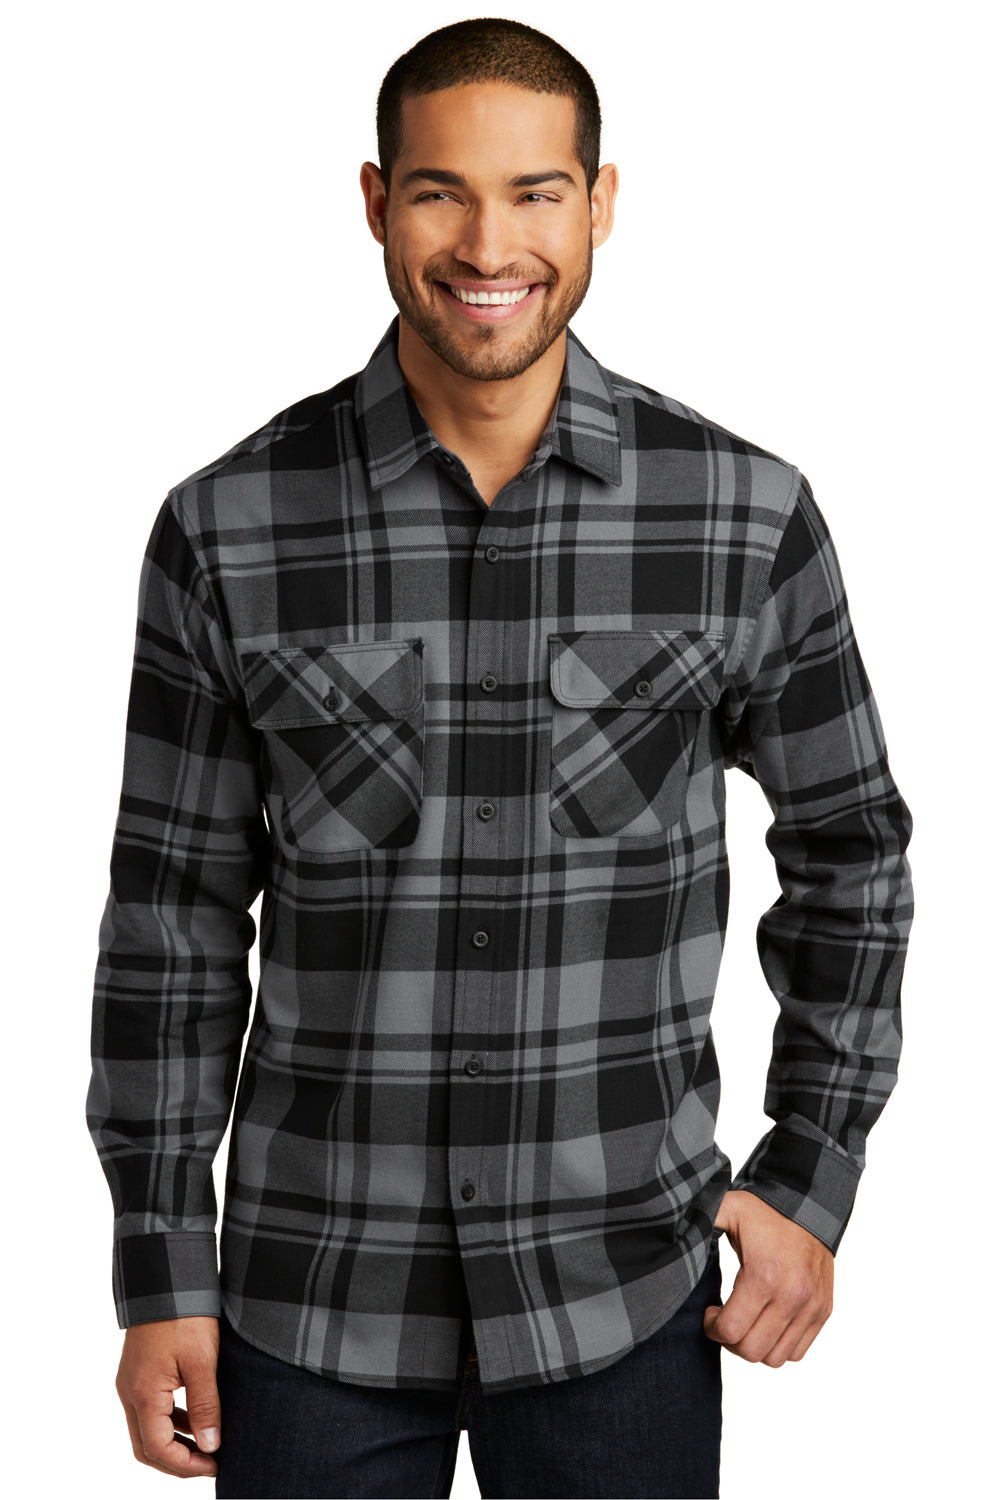 Port Authority W668 Mens Flannel Long Sleeve Button Down Shirt w/ Double Pockets Grey/Black Front